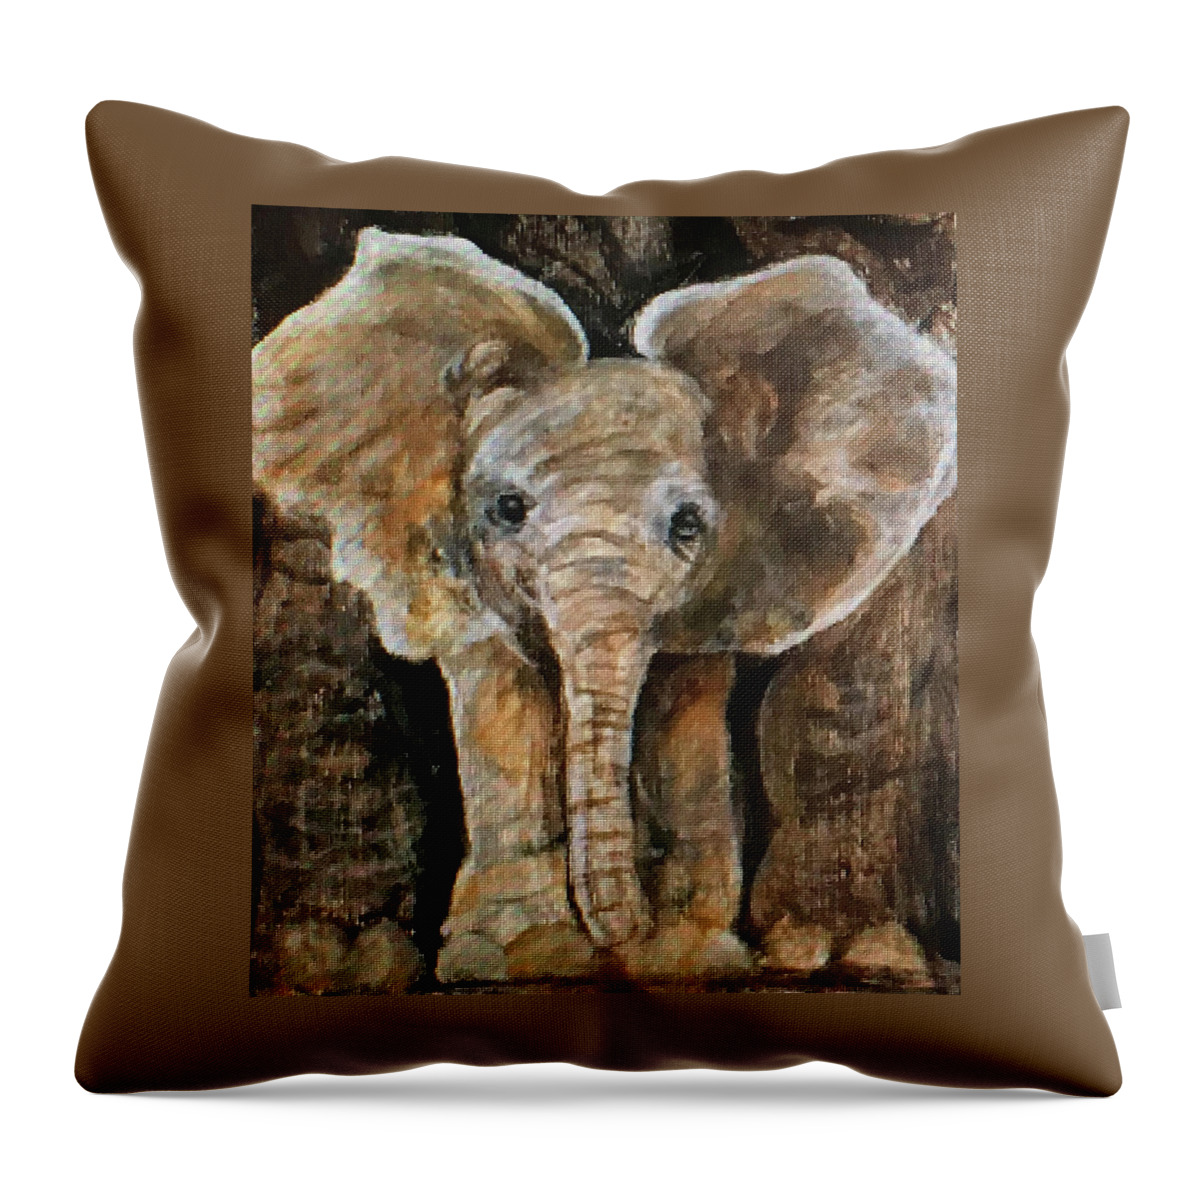 Art Throw Pillow featuring the painting Baby Elephant by Tammy Pool